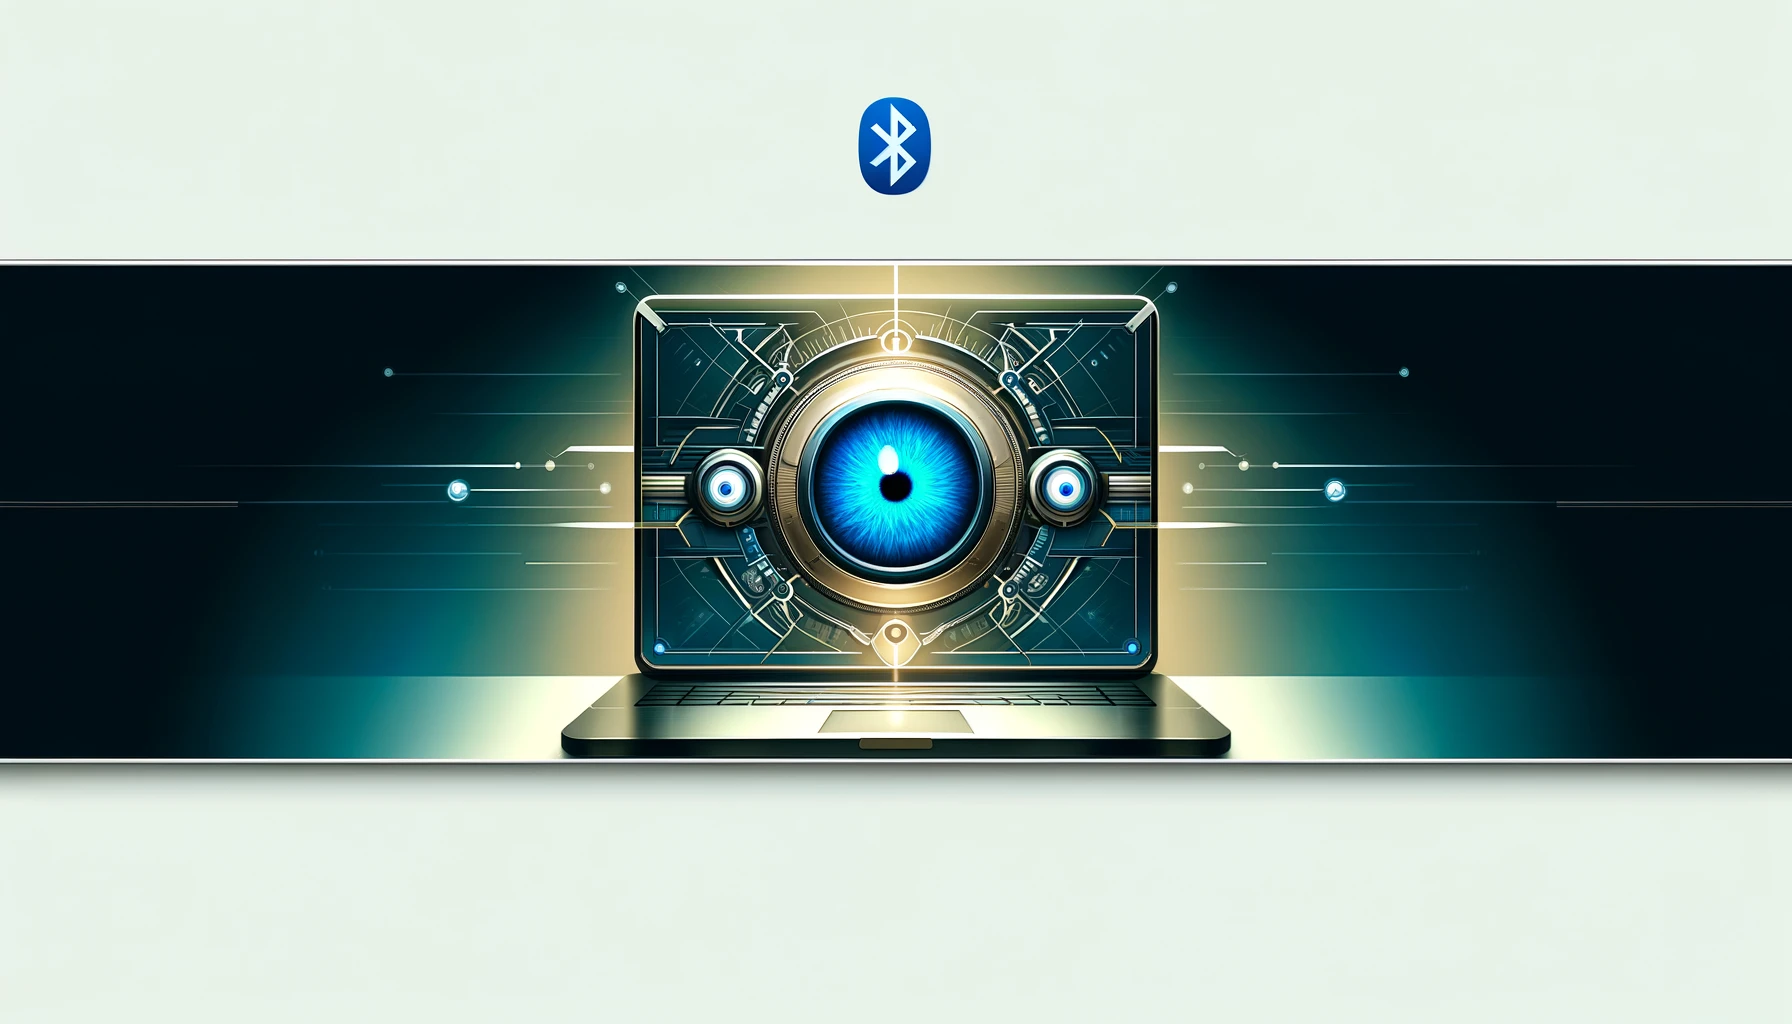 Create a wide header image depicting an all-knowing computer as a Bluetooth device. The image should feature a futuristic computer with a glowing central eye or lens, symbolizing its intelligence. Incorporate the Bluetooth symbol into the design, making it part of the device's sleek and advanced look. The background should be clean and minimalistic, emphasizing the technological and futuristic theme.